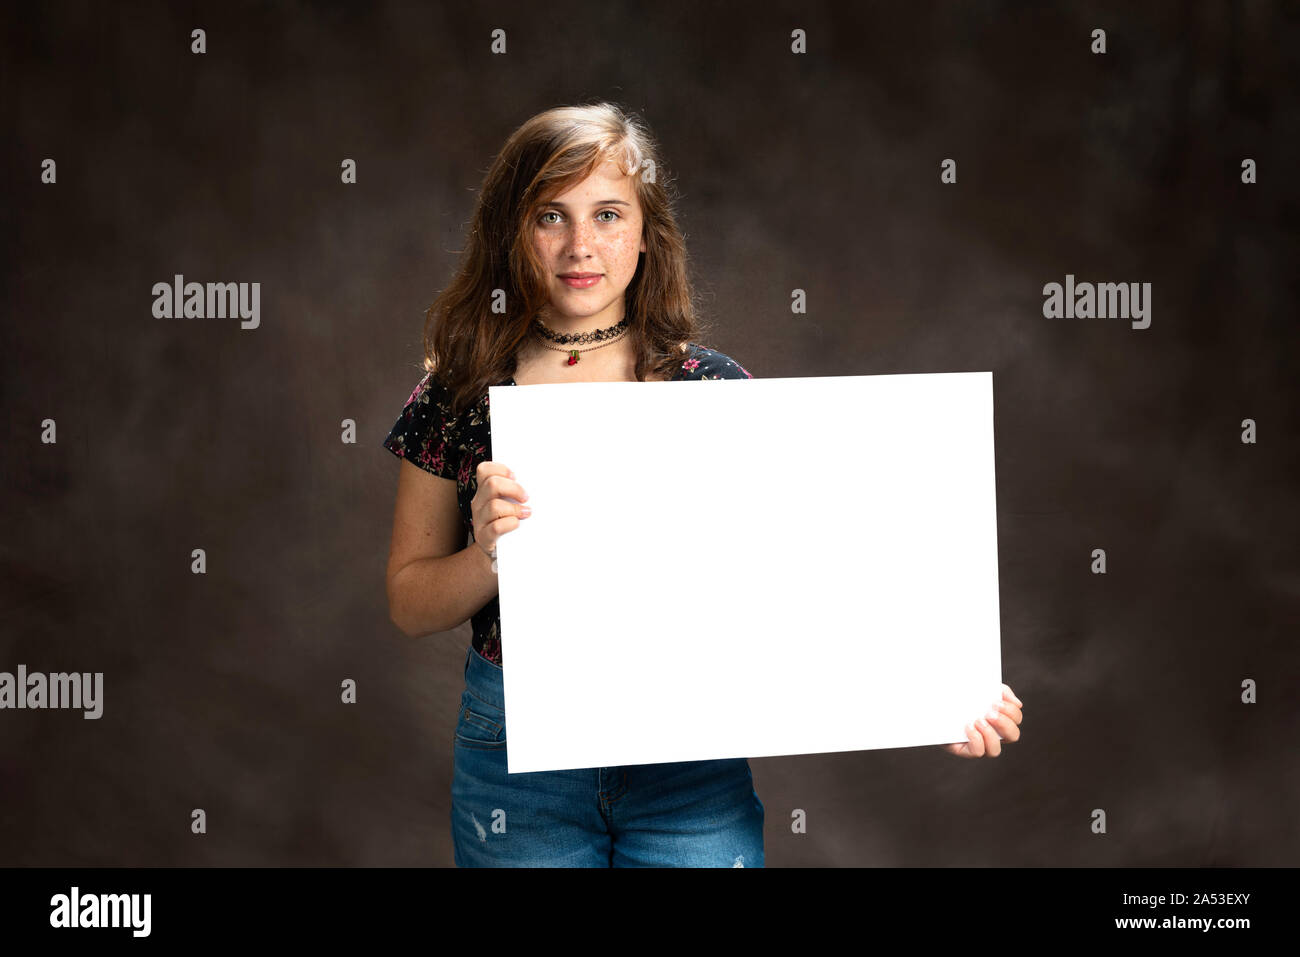 Horizontal shot of a confident pre-teen girl with freckles holding a blank sign. Stock Photo